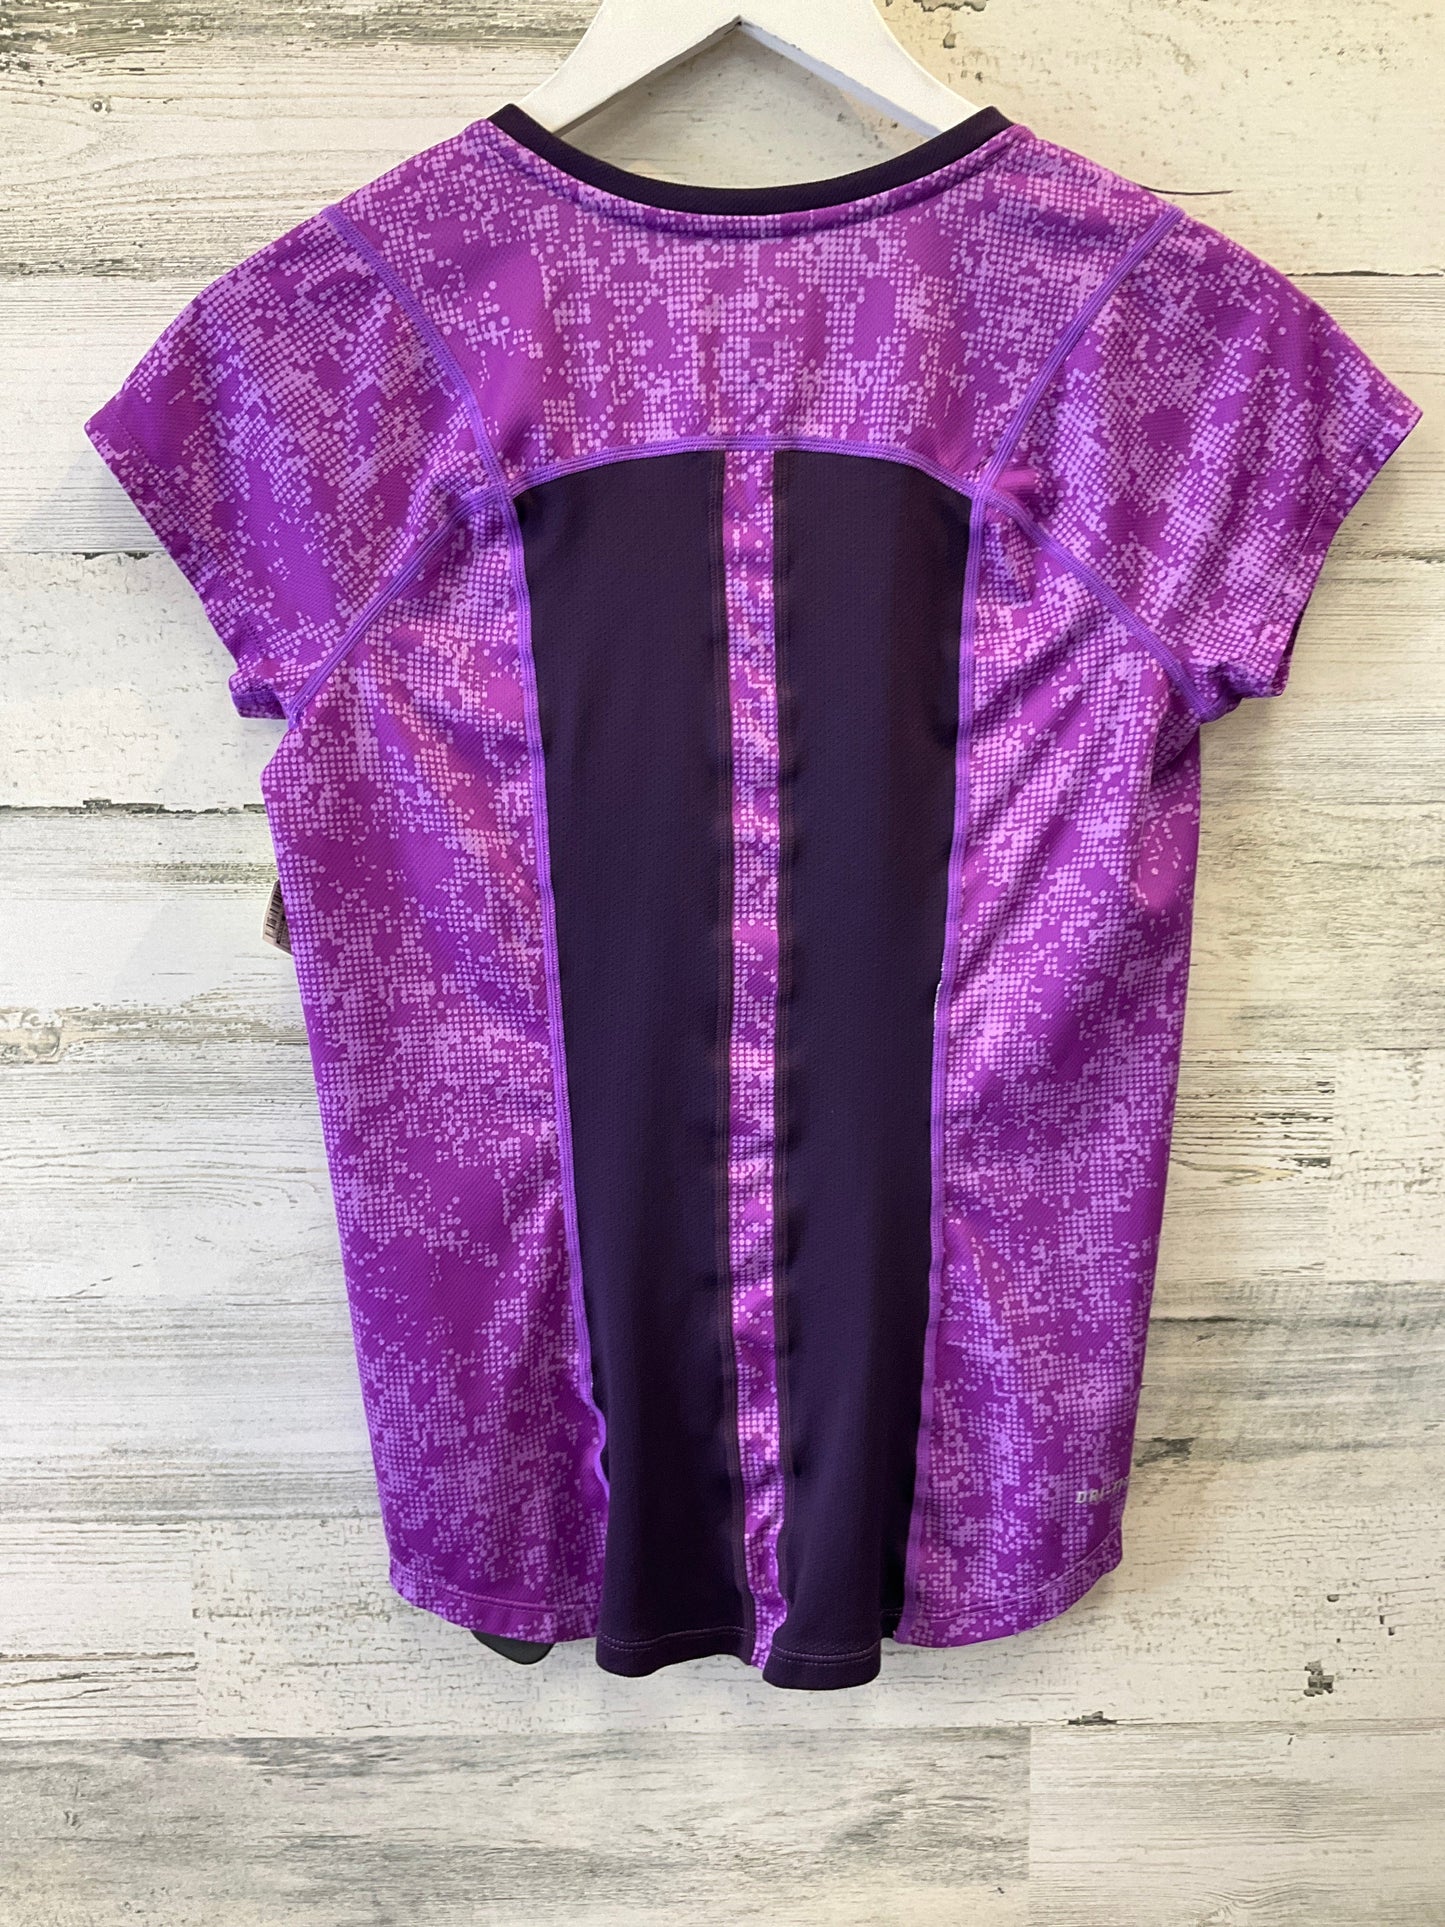 Purple Athletic Top Short Sleeve Nike Apparel, Size S